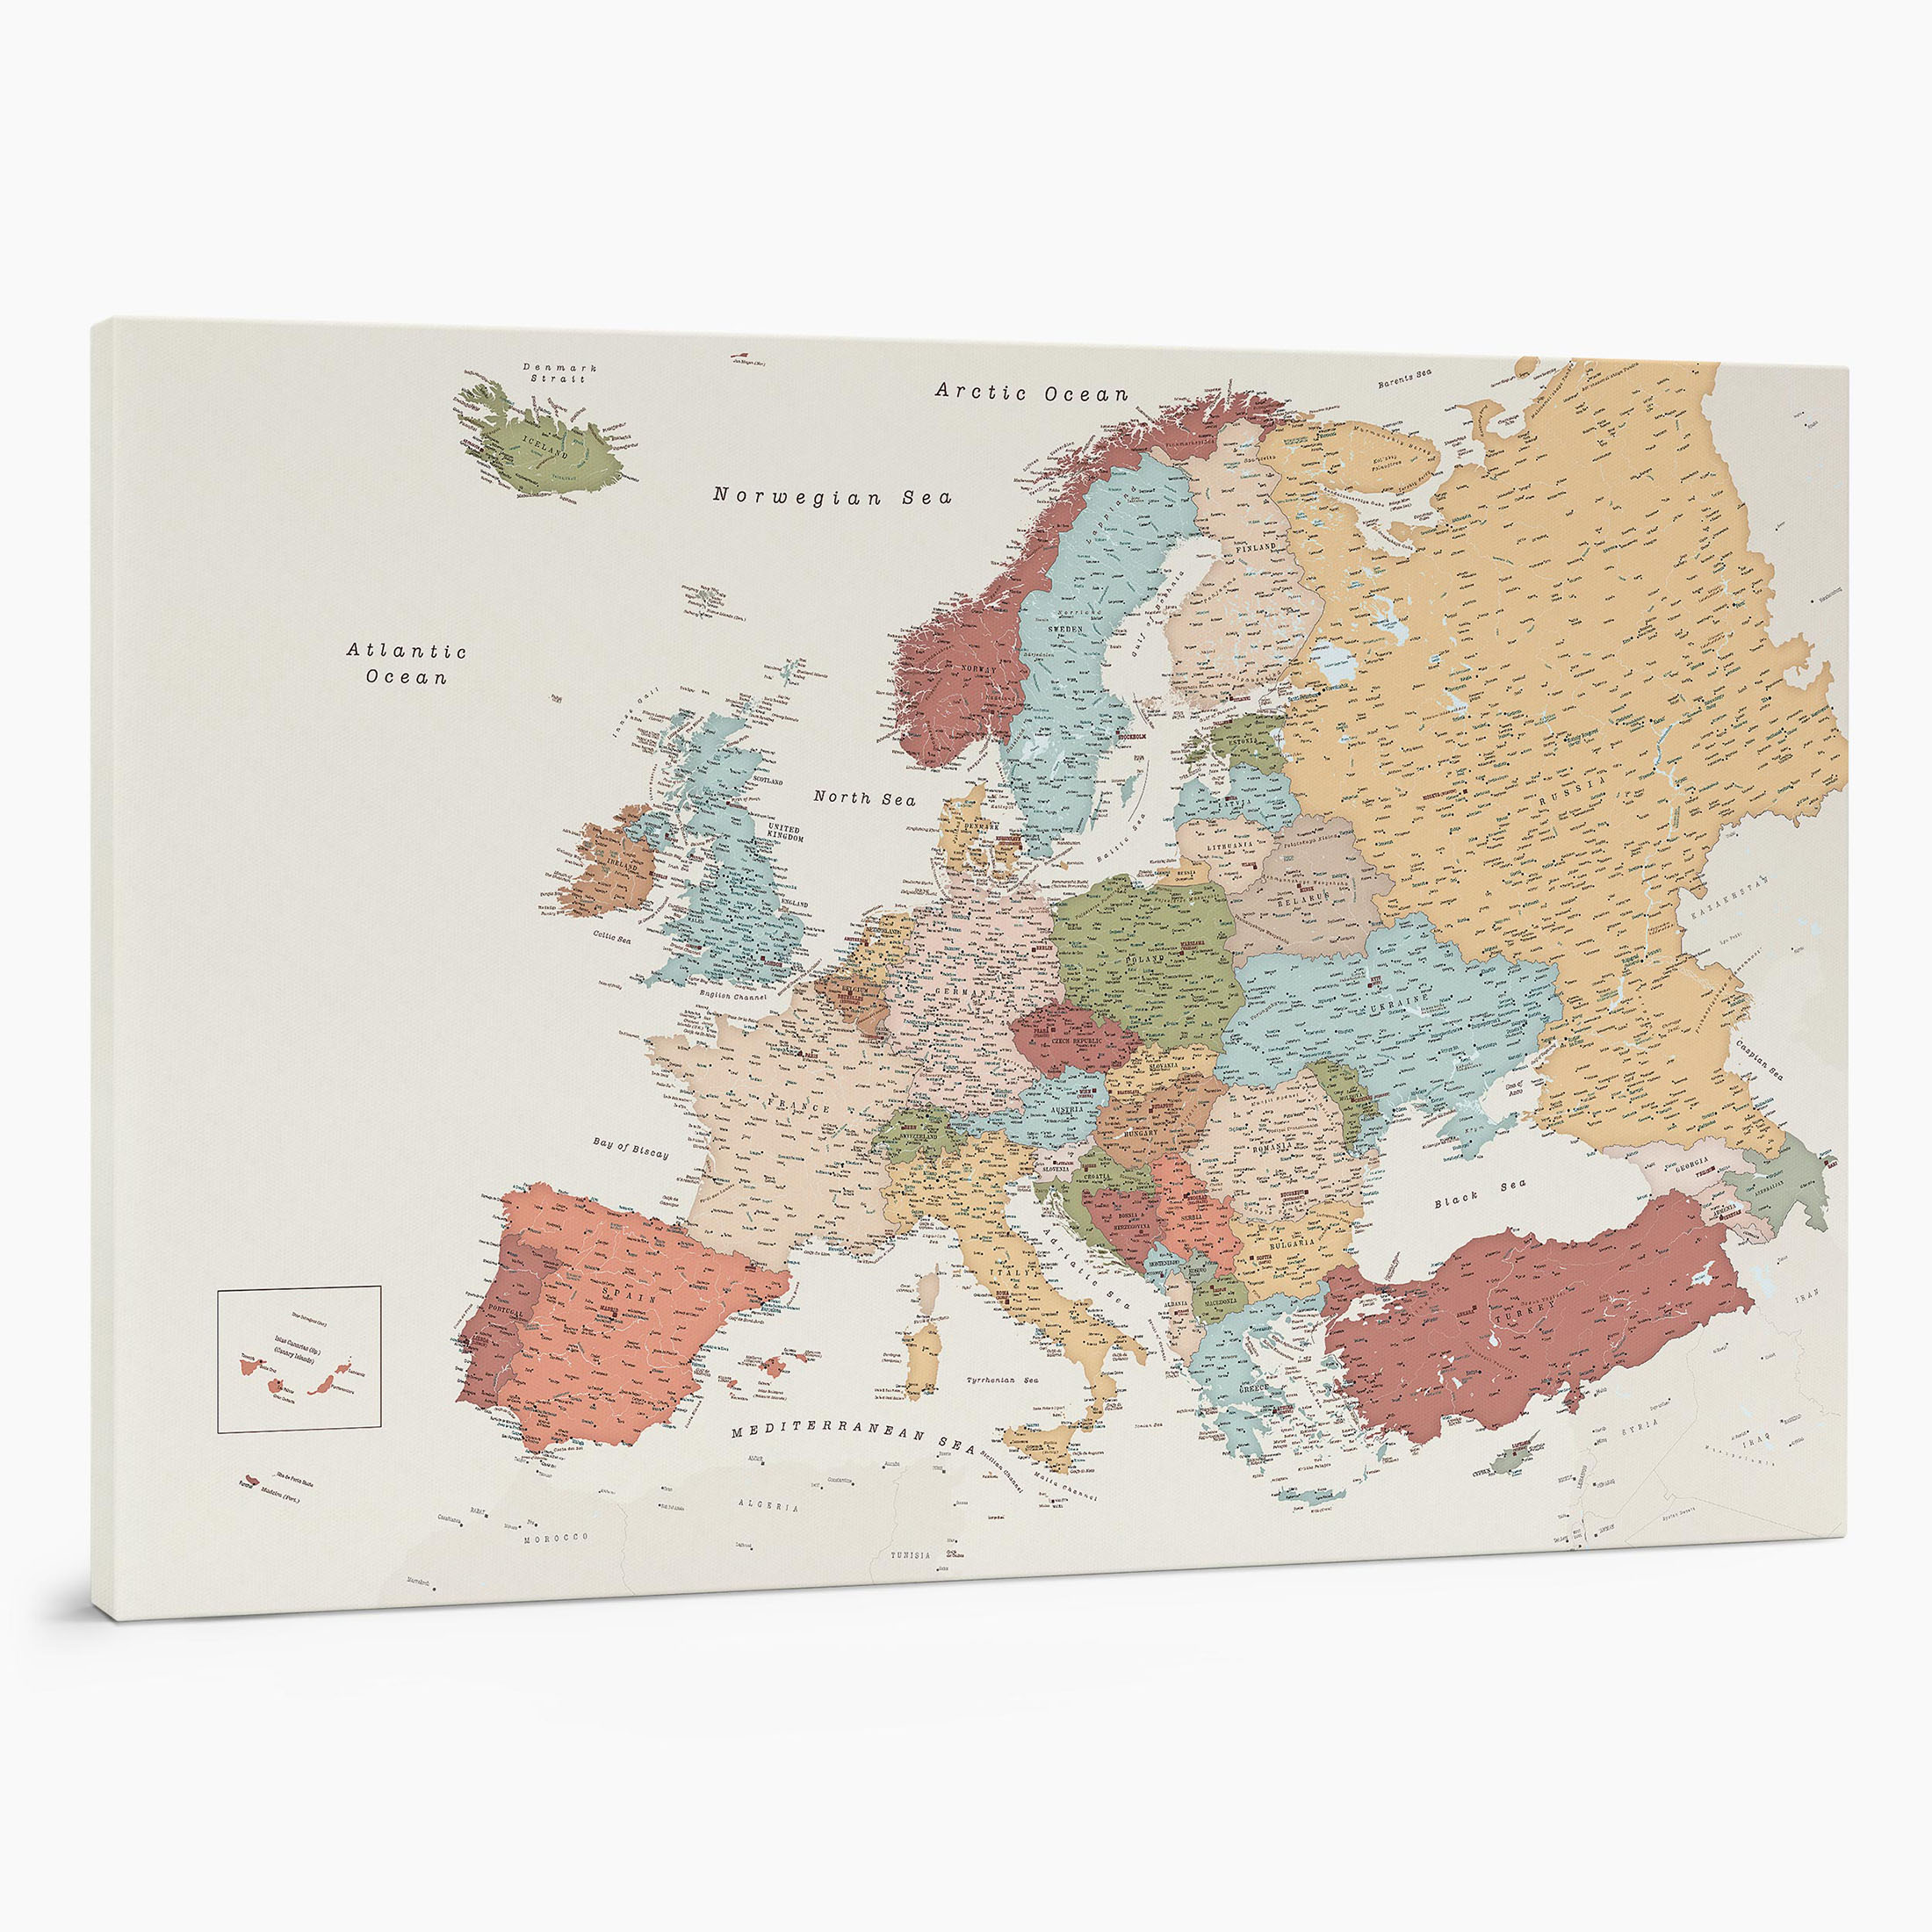 9EU large push pin europe map to track places visited on canvas colorful